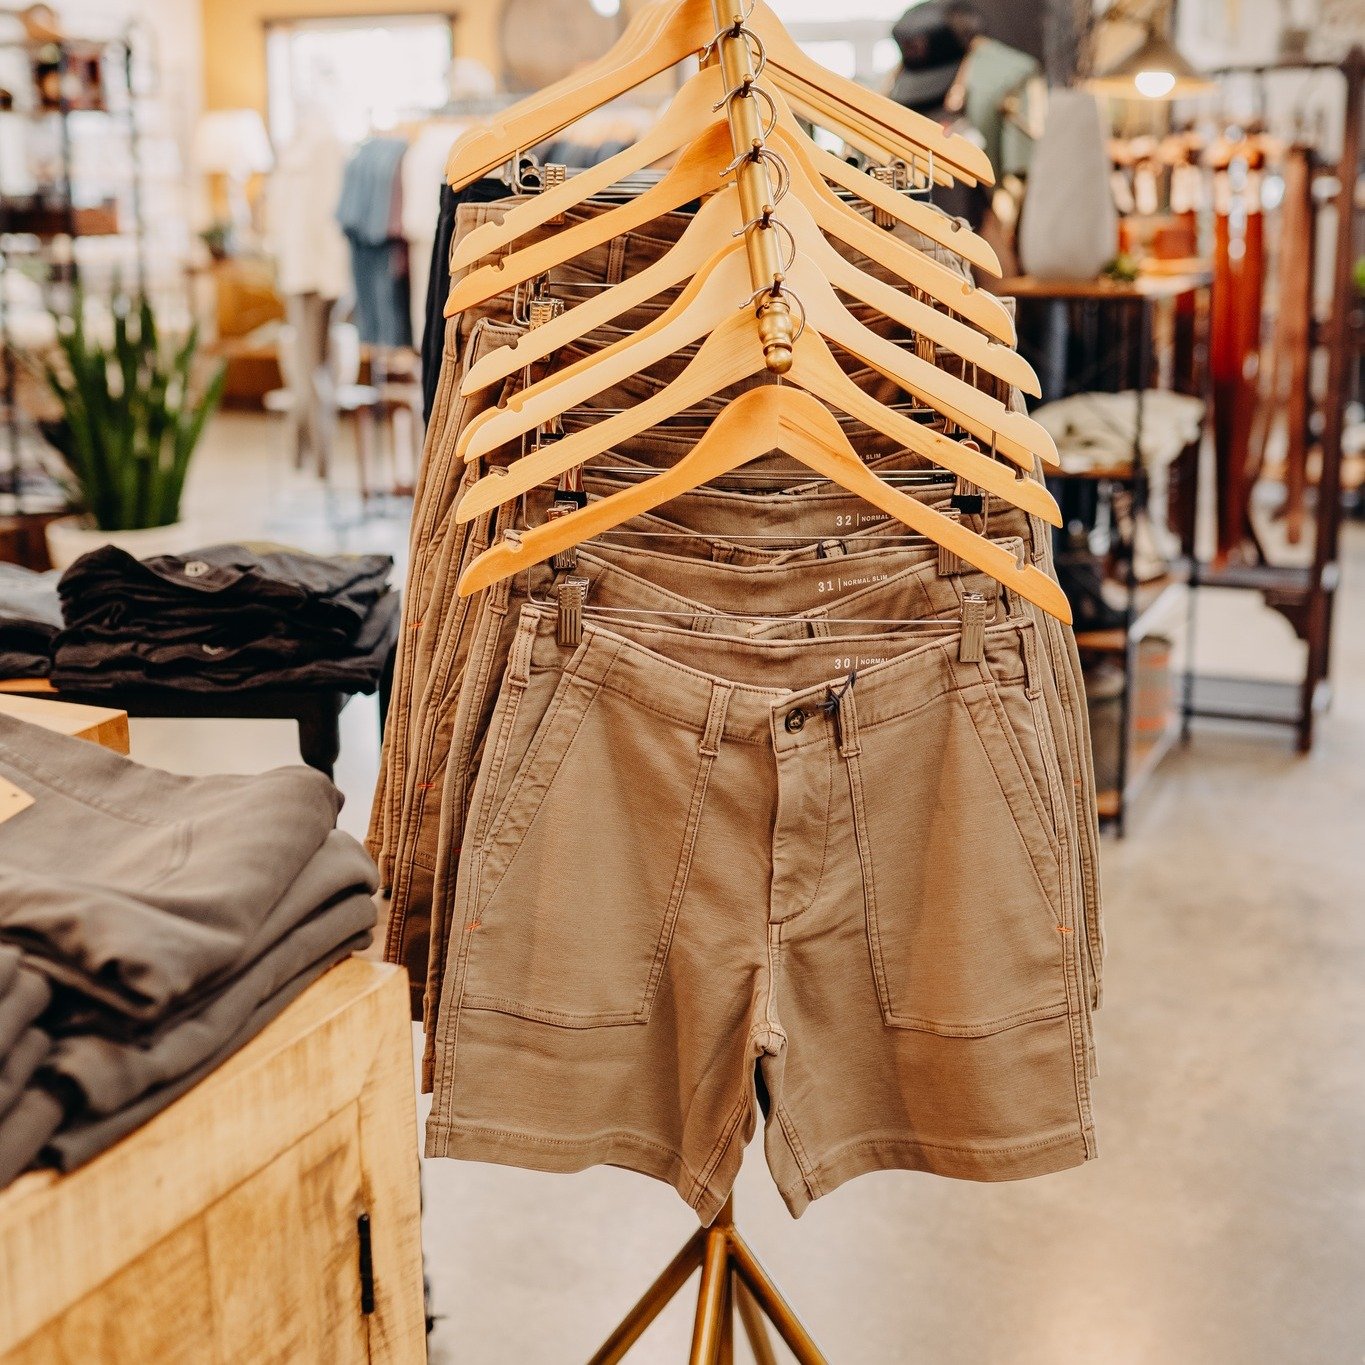 Elevate your style with the finest threads for men. John Scott Men's Apparel offers nothing but high-quality shorts! 

#johnscottmensapparel #shortsseason #mensfashion